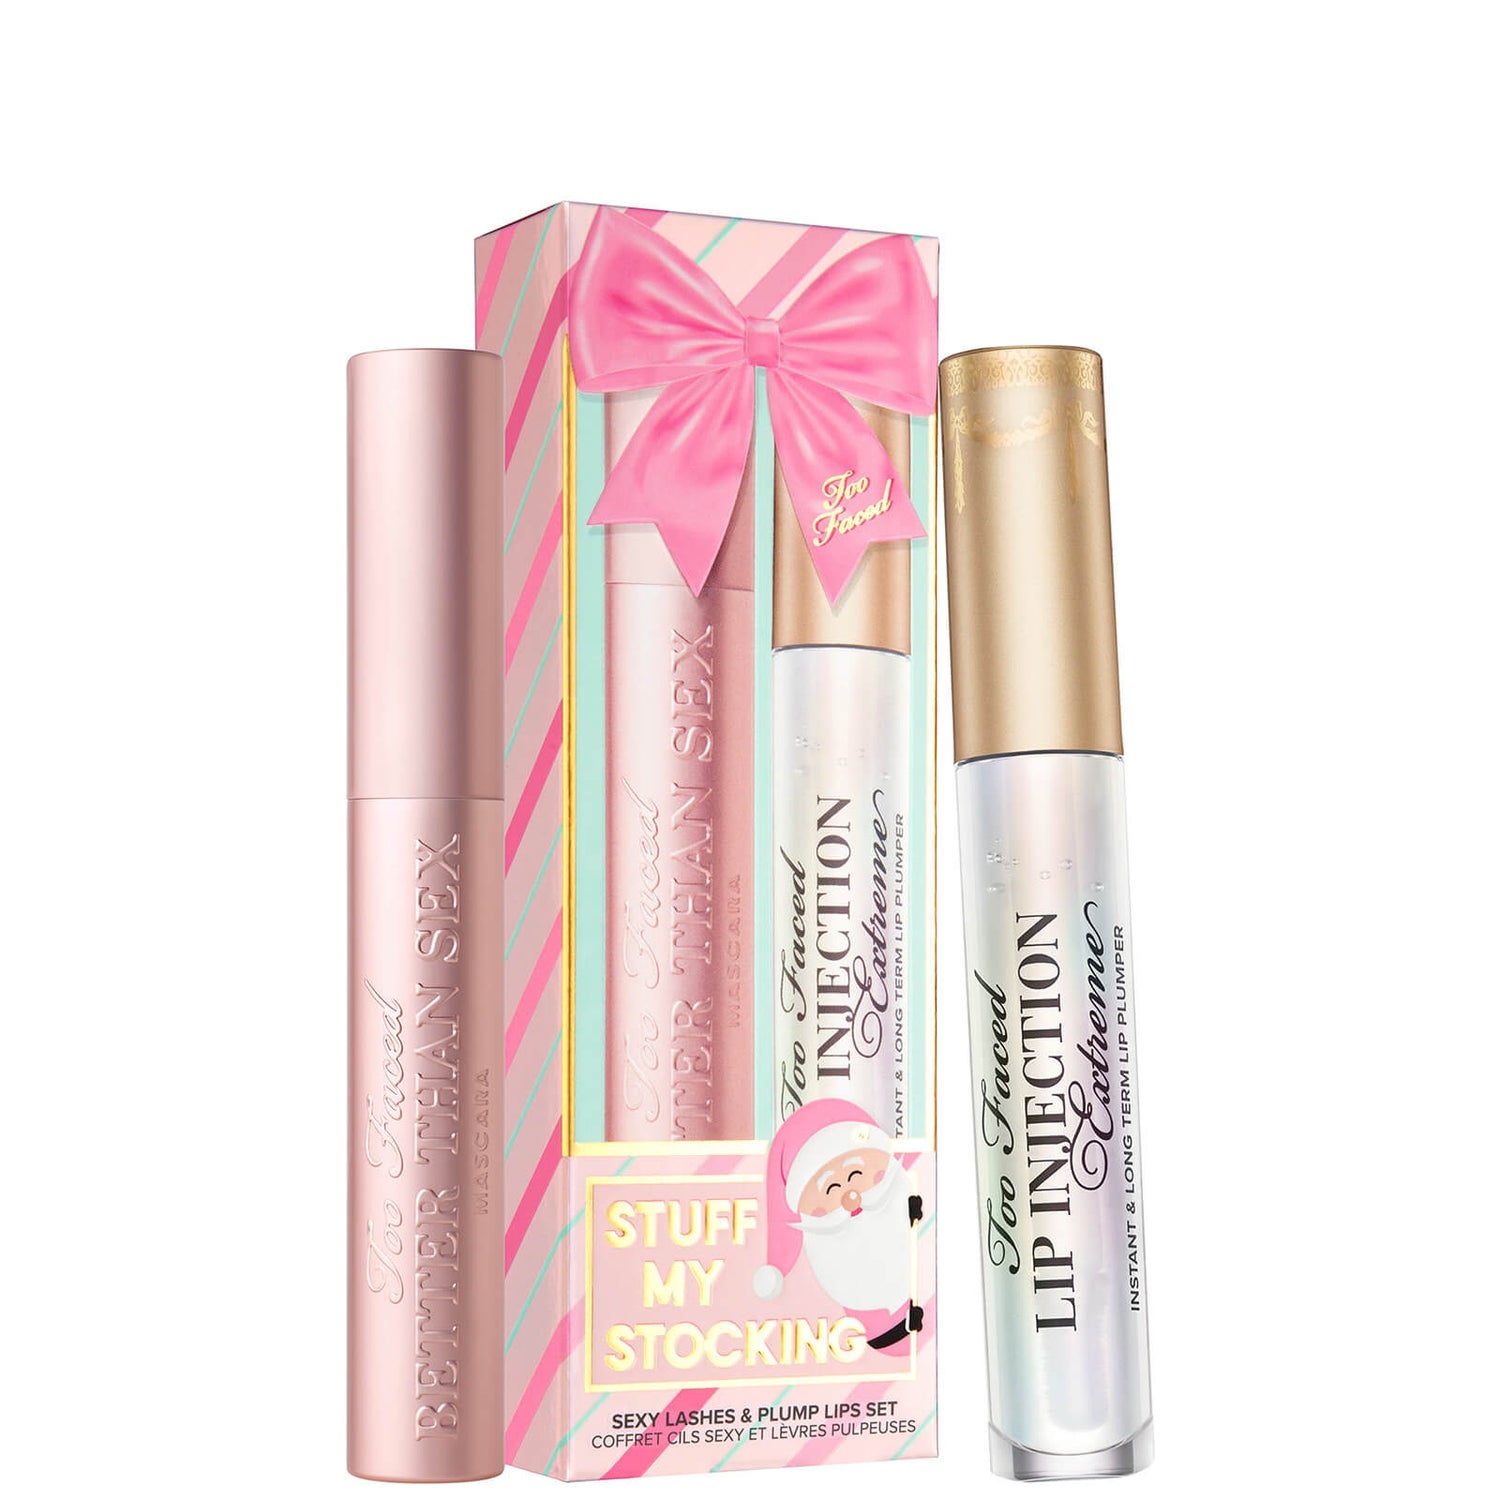 Too Faced Limited Edition Stuff My Stocking Mascara and Lip Plumper Set (Worth £46.00)